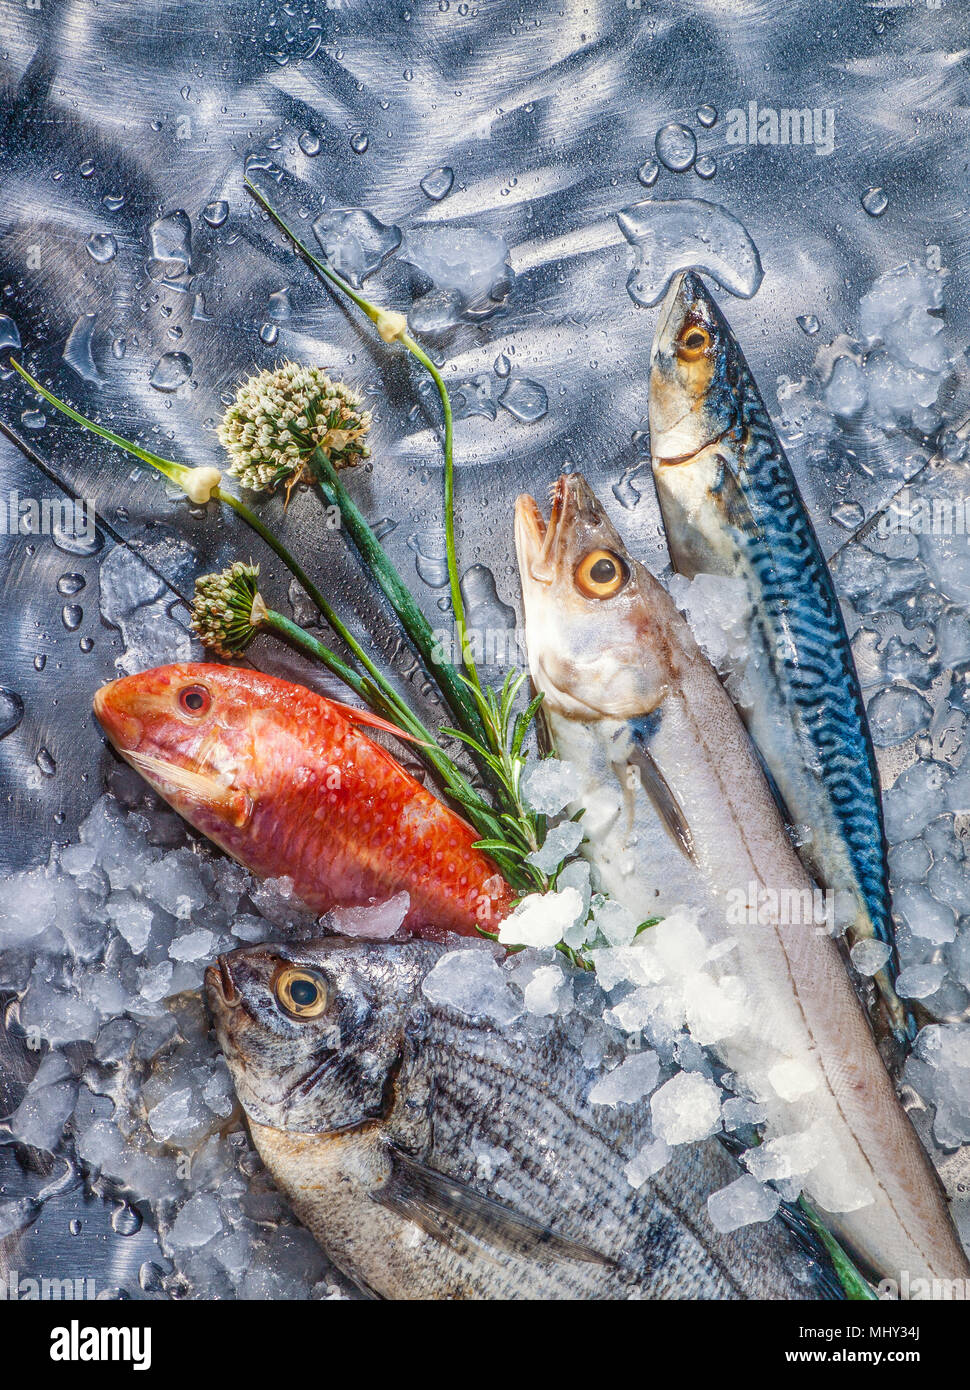 arrangement of fresh fish with ice and fresh herbs on a polished steel background Stock Photo